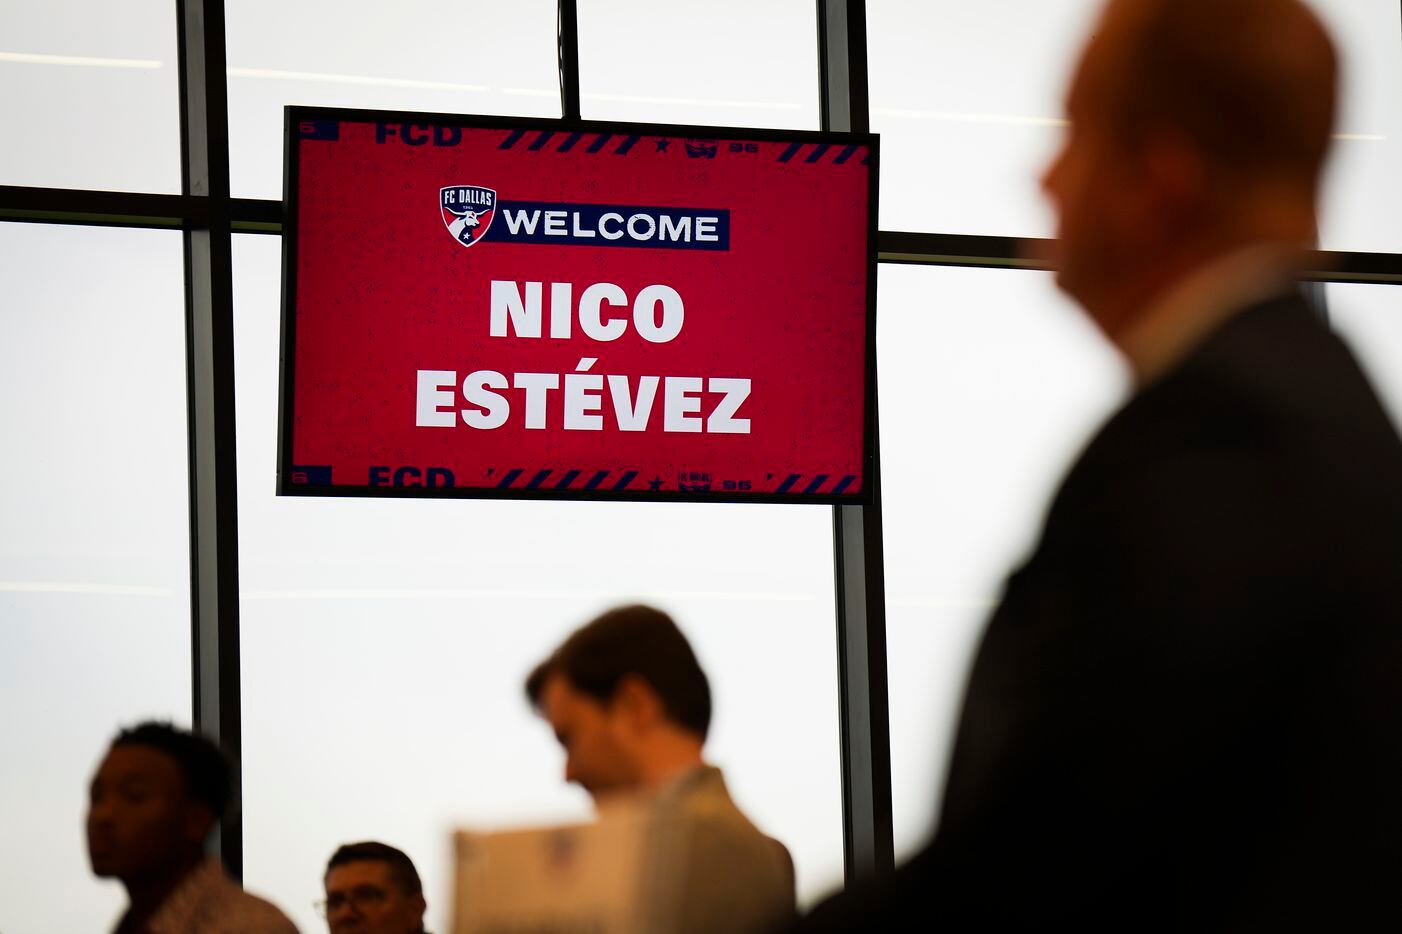 Frisco mayor Jeff Cheney (right) listens as new FC Dallas head coach Nico Estévez addresses his introductory press conference at the National Soccer Hall of Fame on Friday, Dec. 3, 2021, in Frisco, Texas.